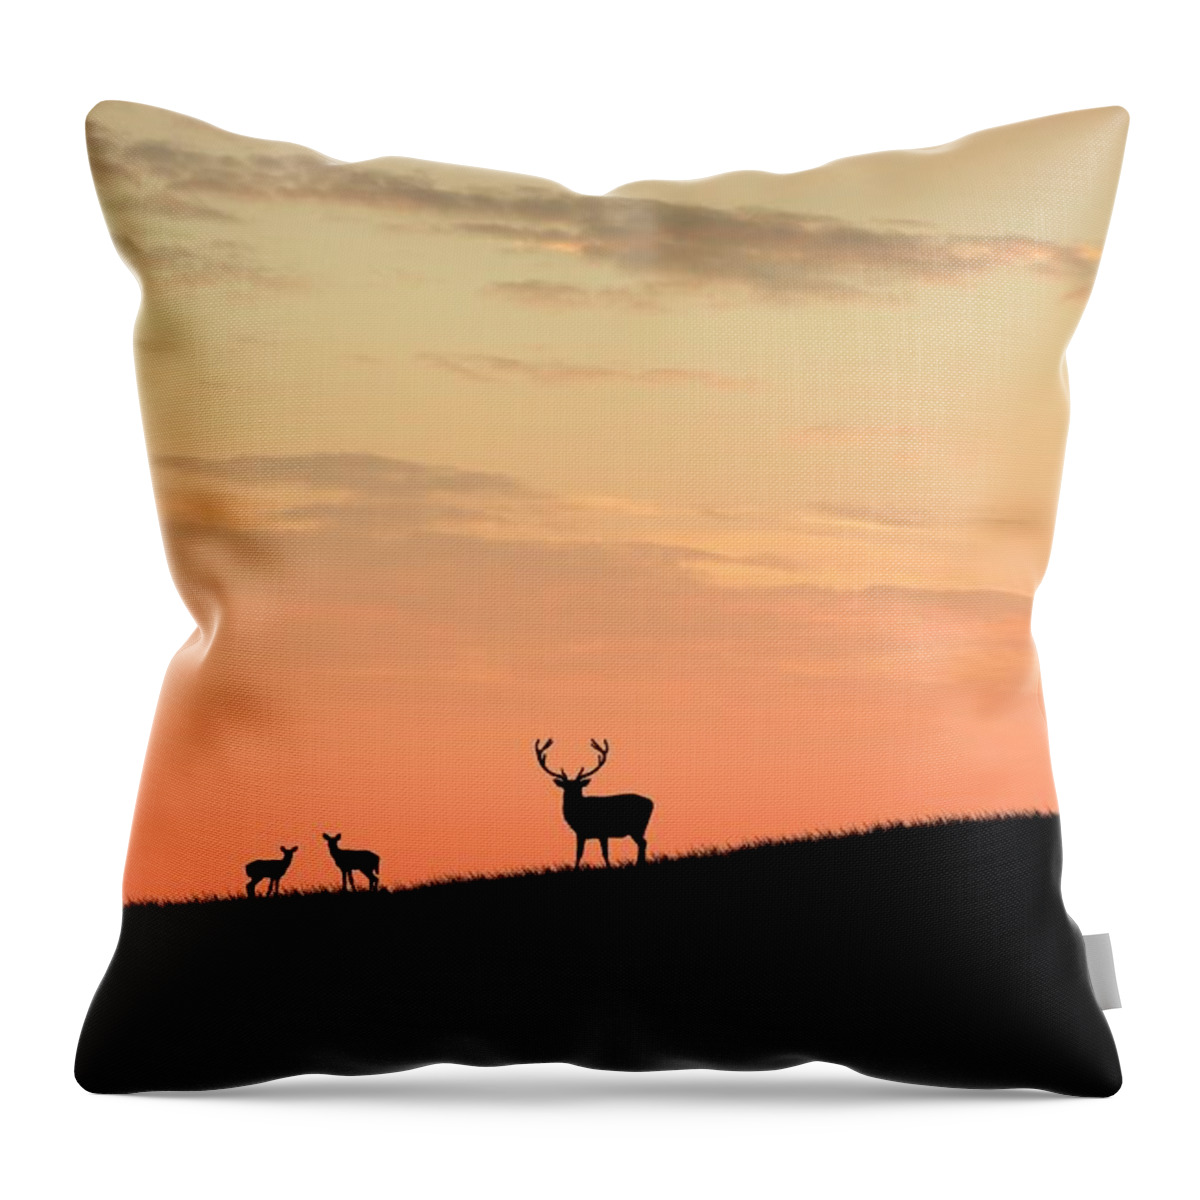 Animals Throw Pillow featuring the digital art Deer in silhouette by John Wills